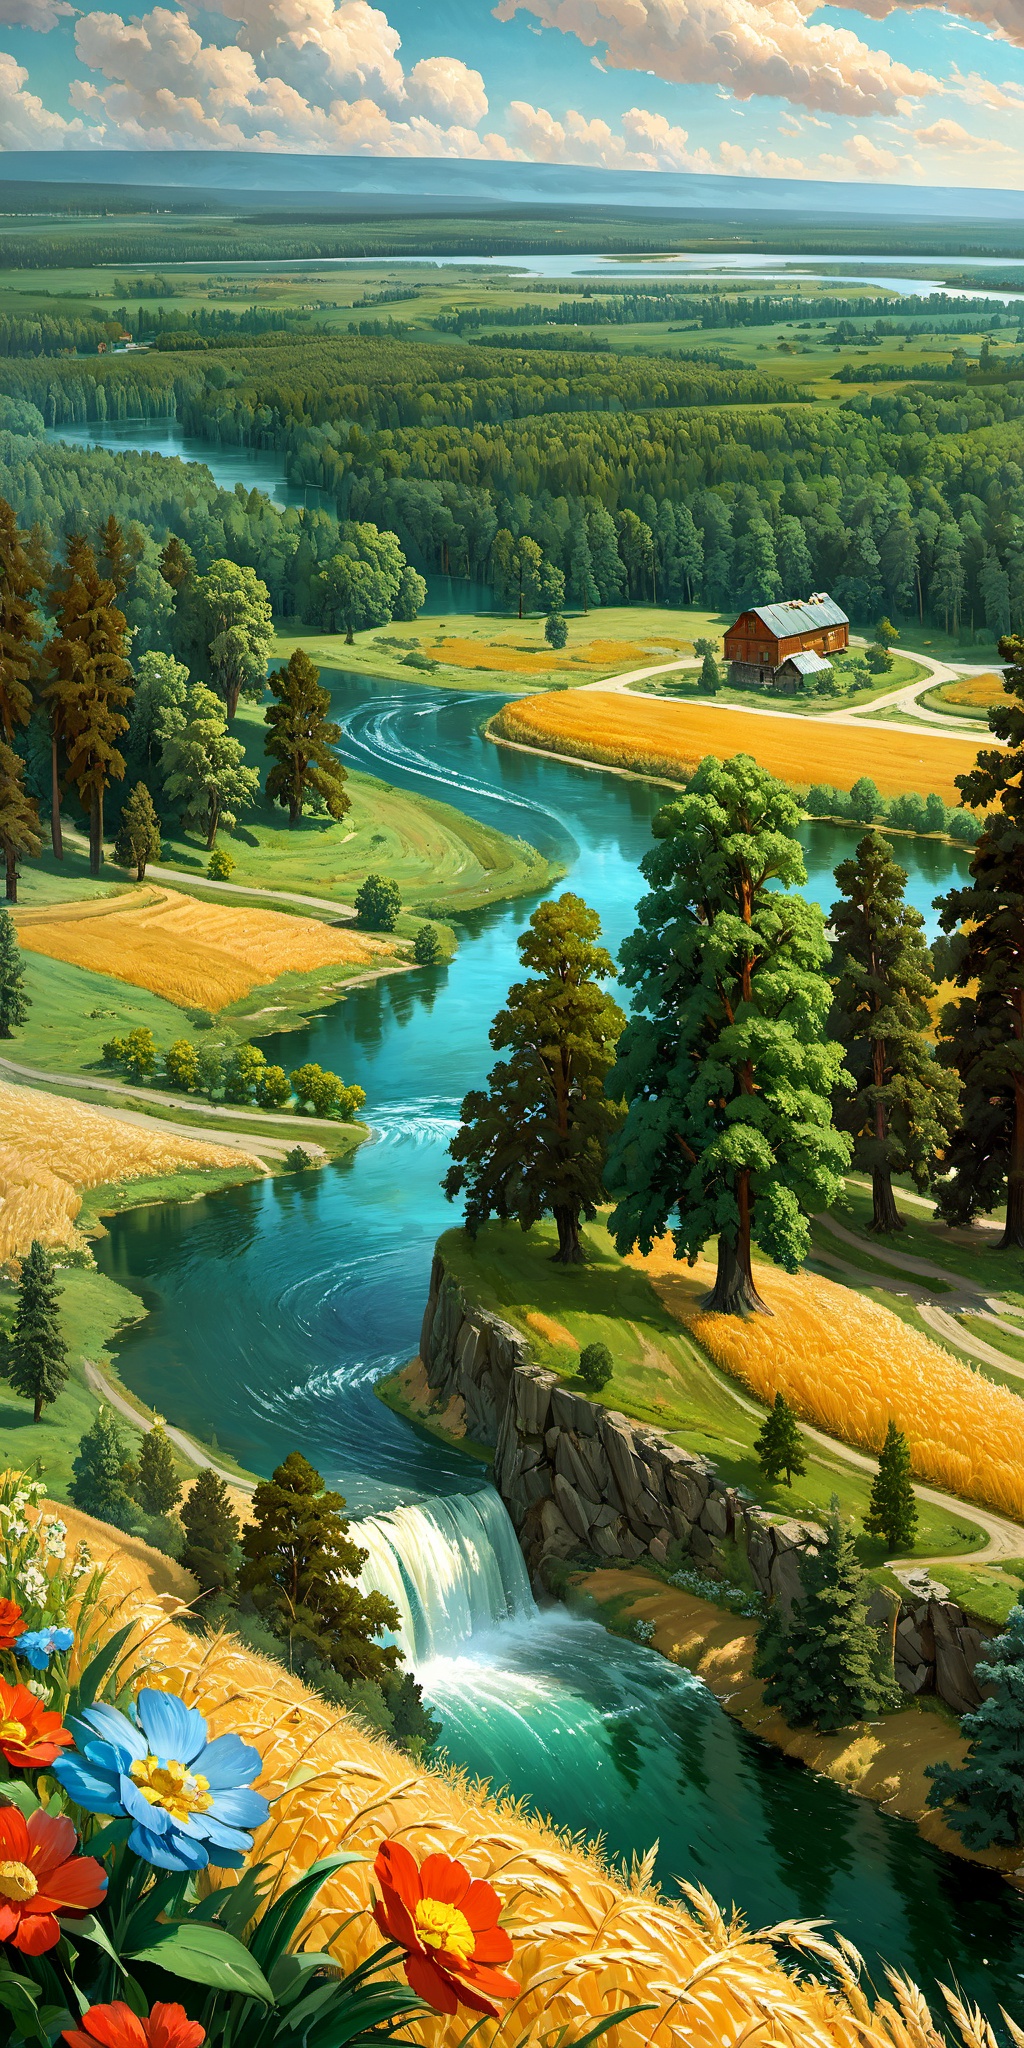 (Wheat), fields,ivan Shishkin,nature,trees,forest,water fall,sky,clouds,rock,lake,cloud,scenery,leafs,flowers,mountain at far,river,from above,countryside buildings at far,